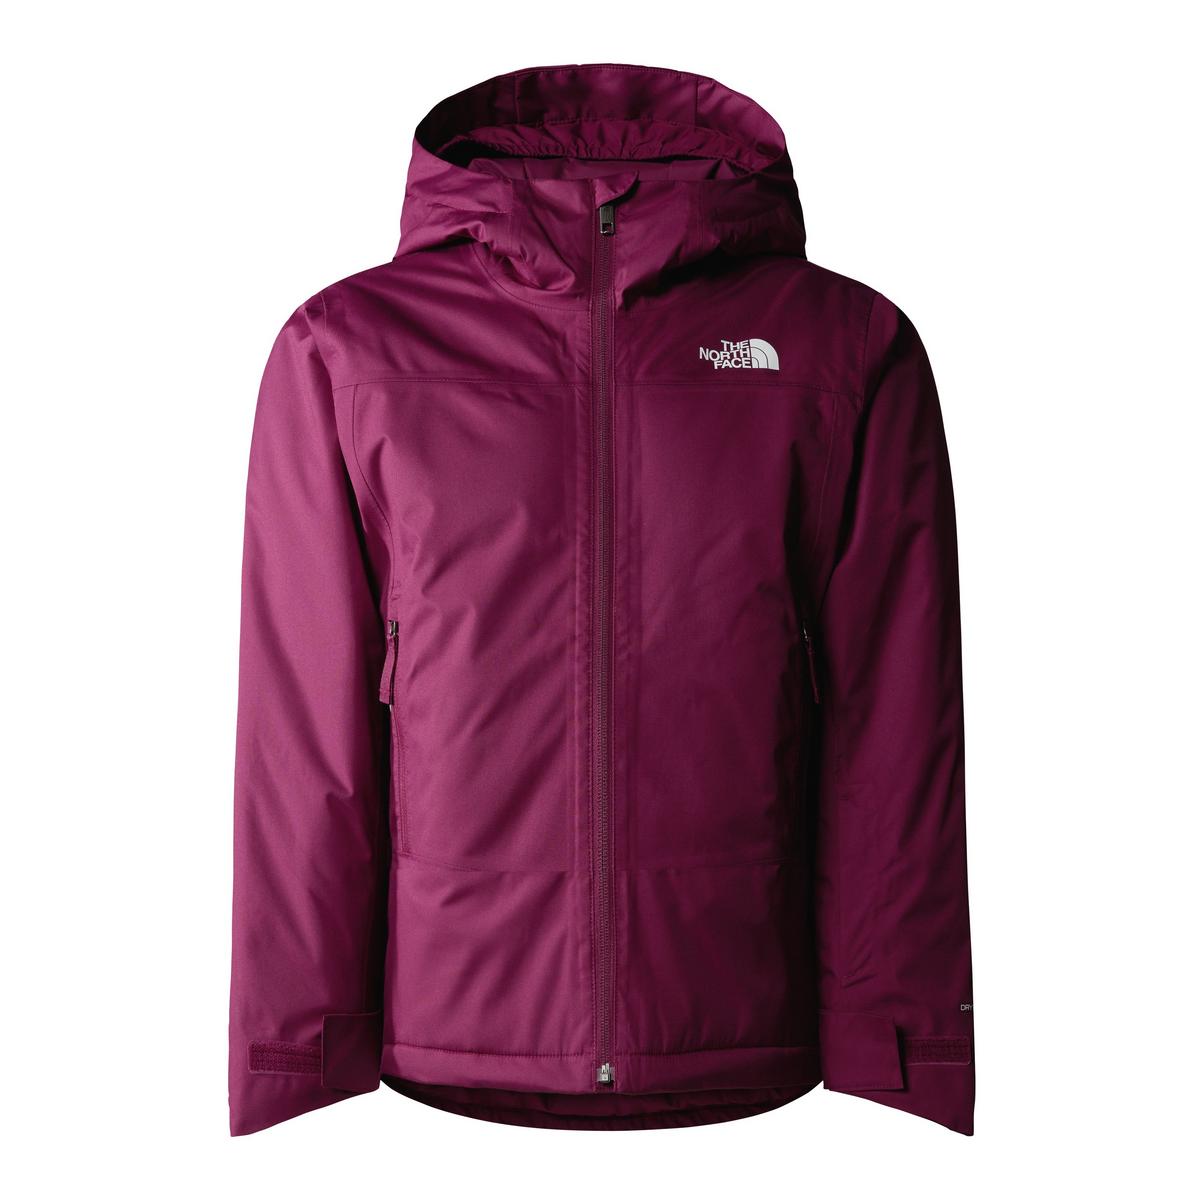 The North Face Girl's Freedom Insulated Ski Jacket - Purple